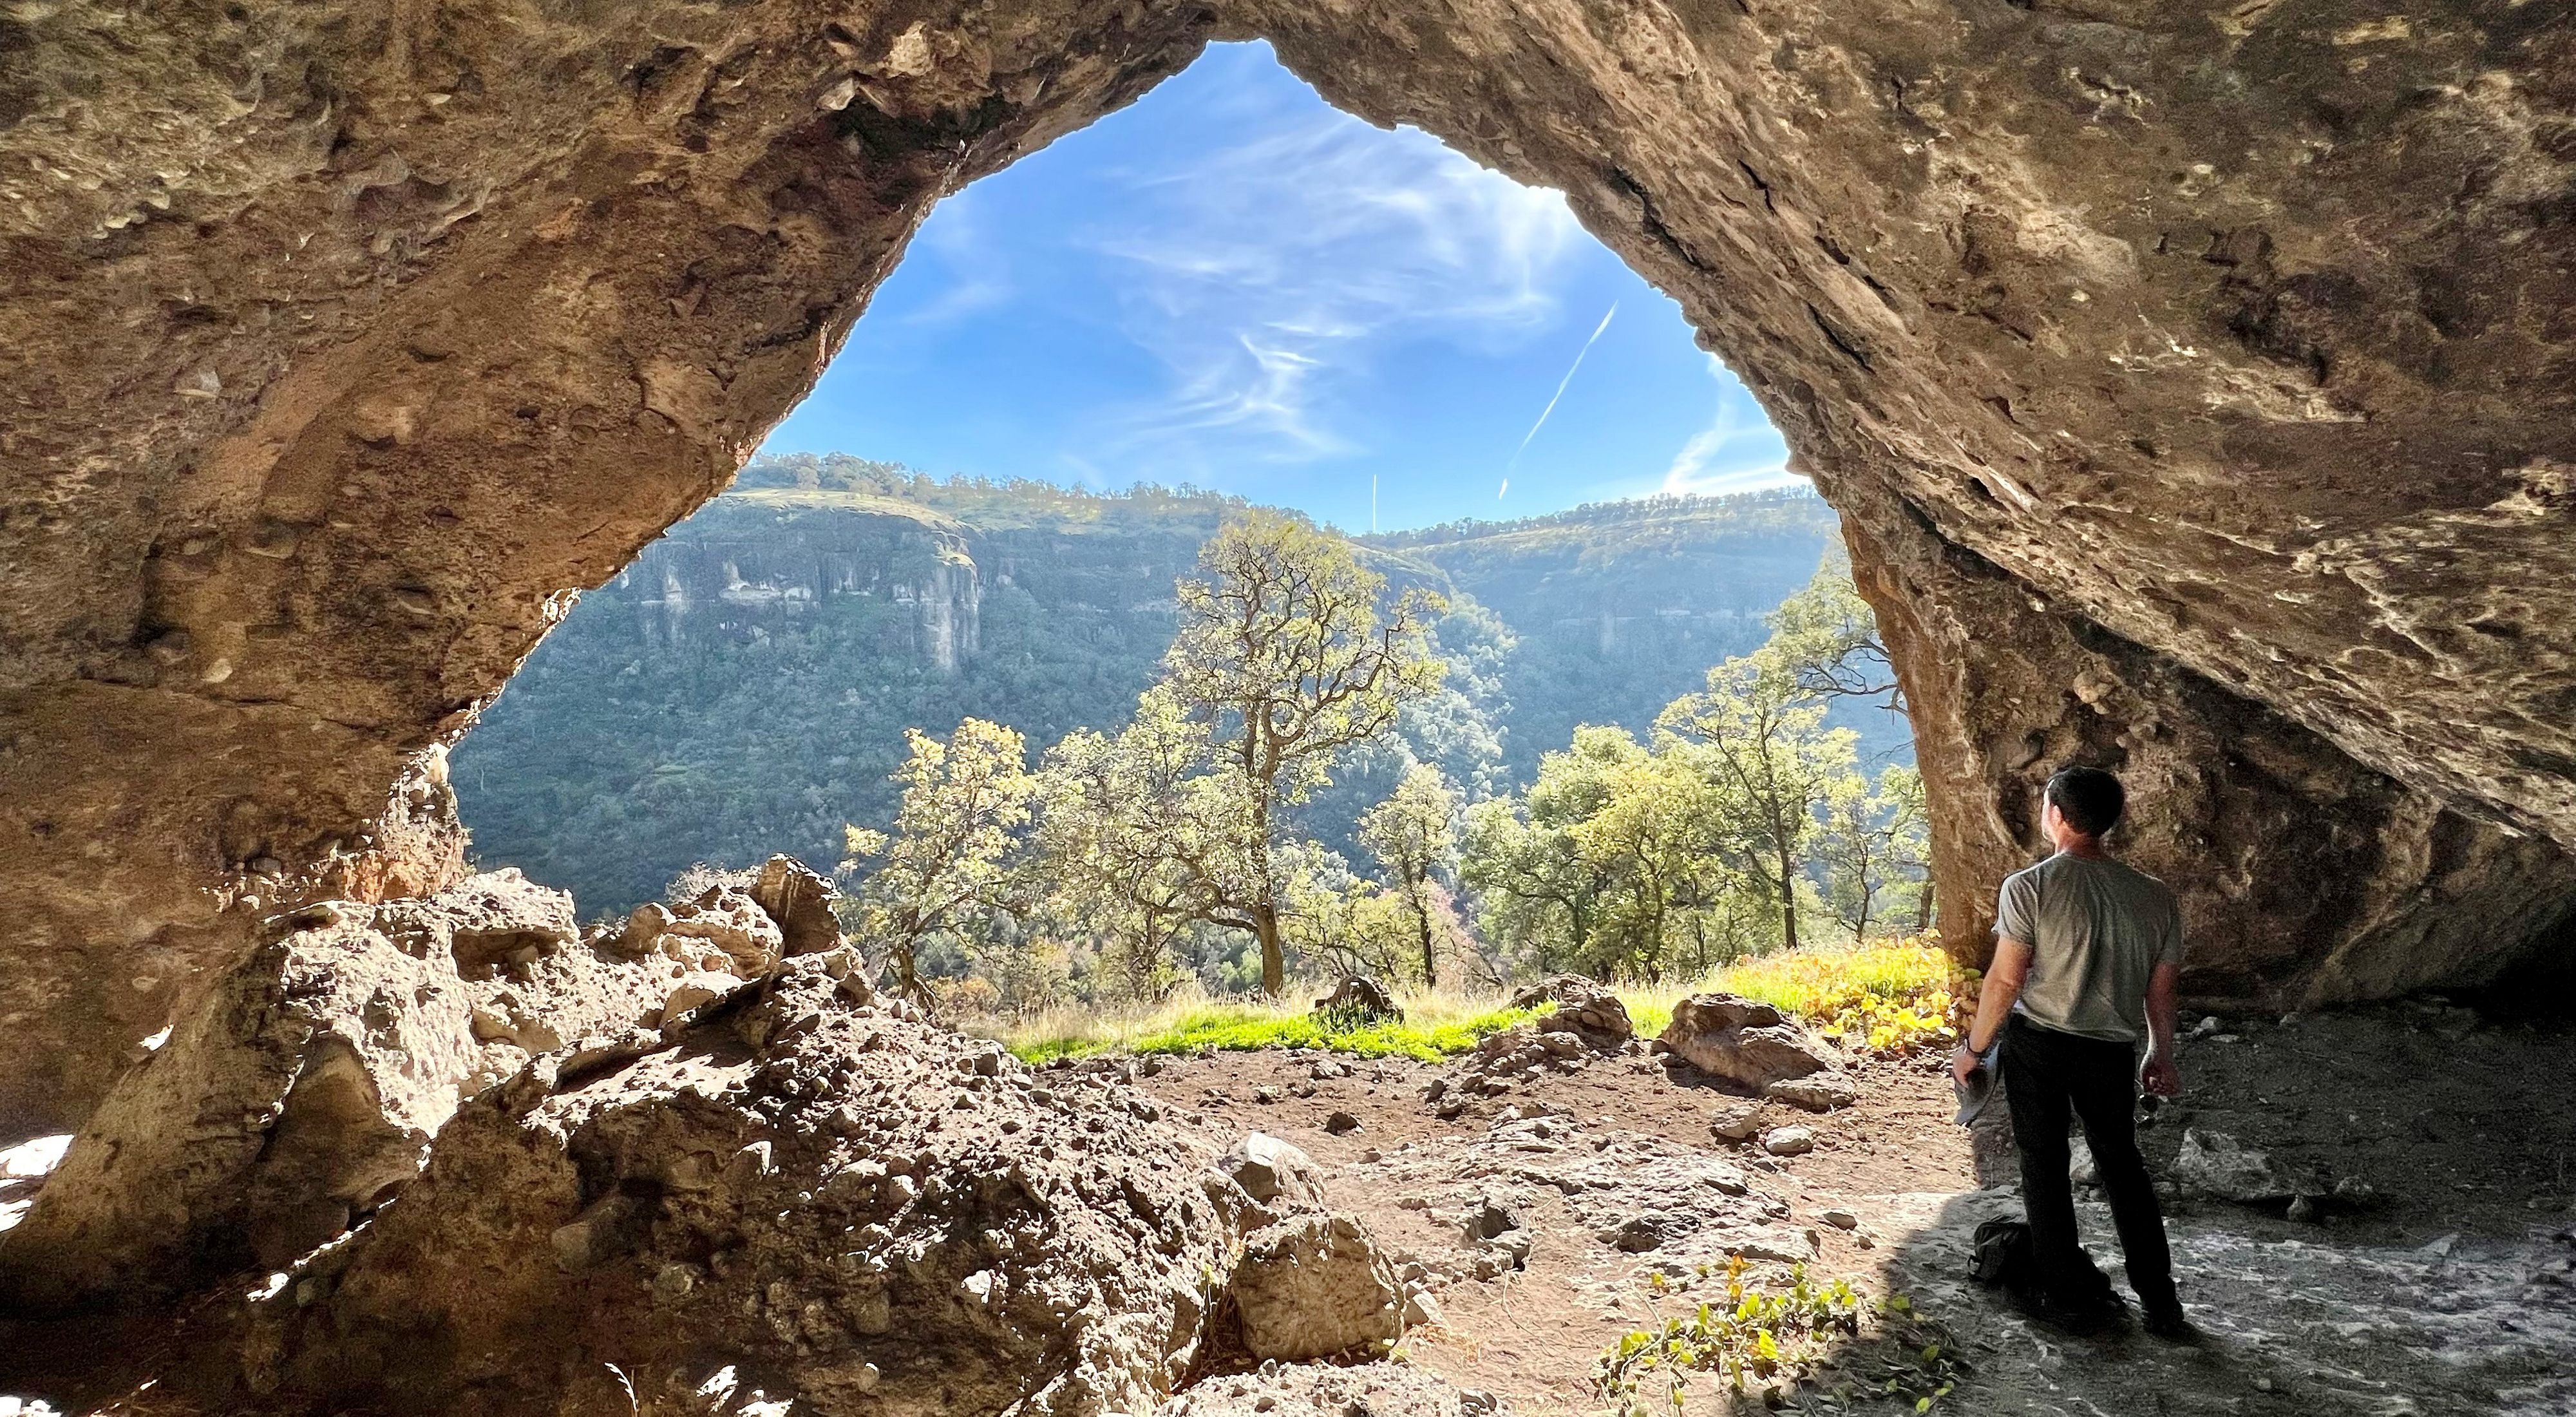 A person stands inside a rock overhang and looks out at a deep canyon at Dye Creek Preserve in California.